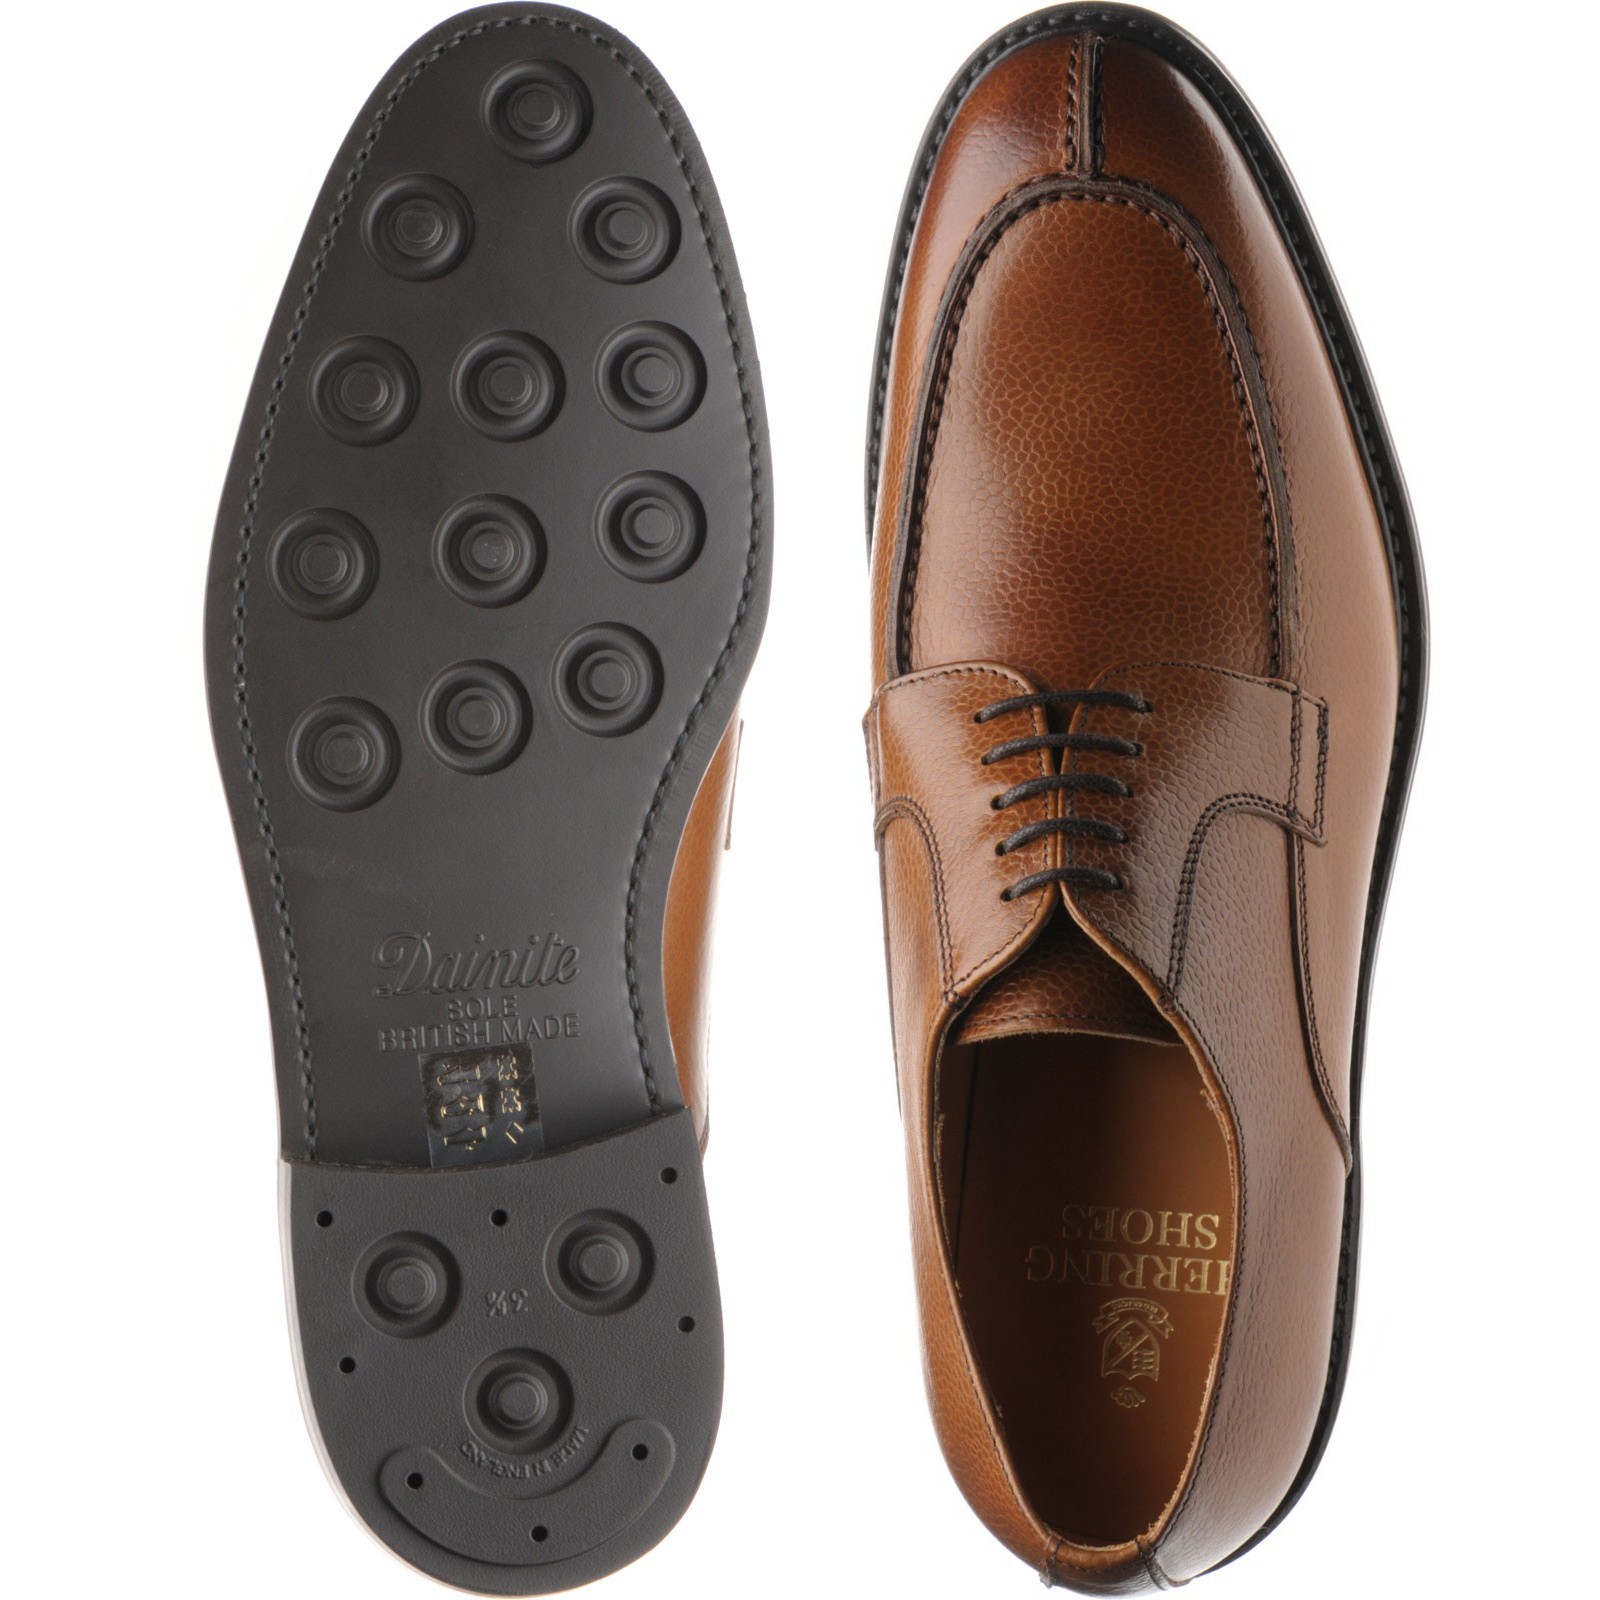 Herring shoes | Herring Classic | Tiverton (Rubber) rubber-soled Derby ...